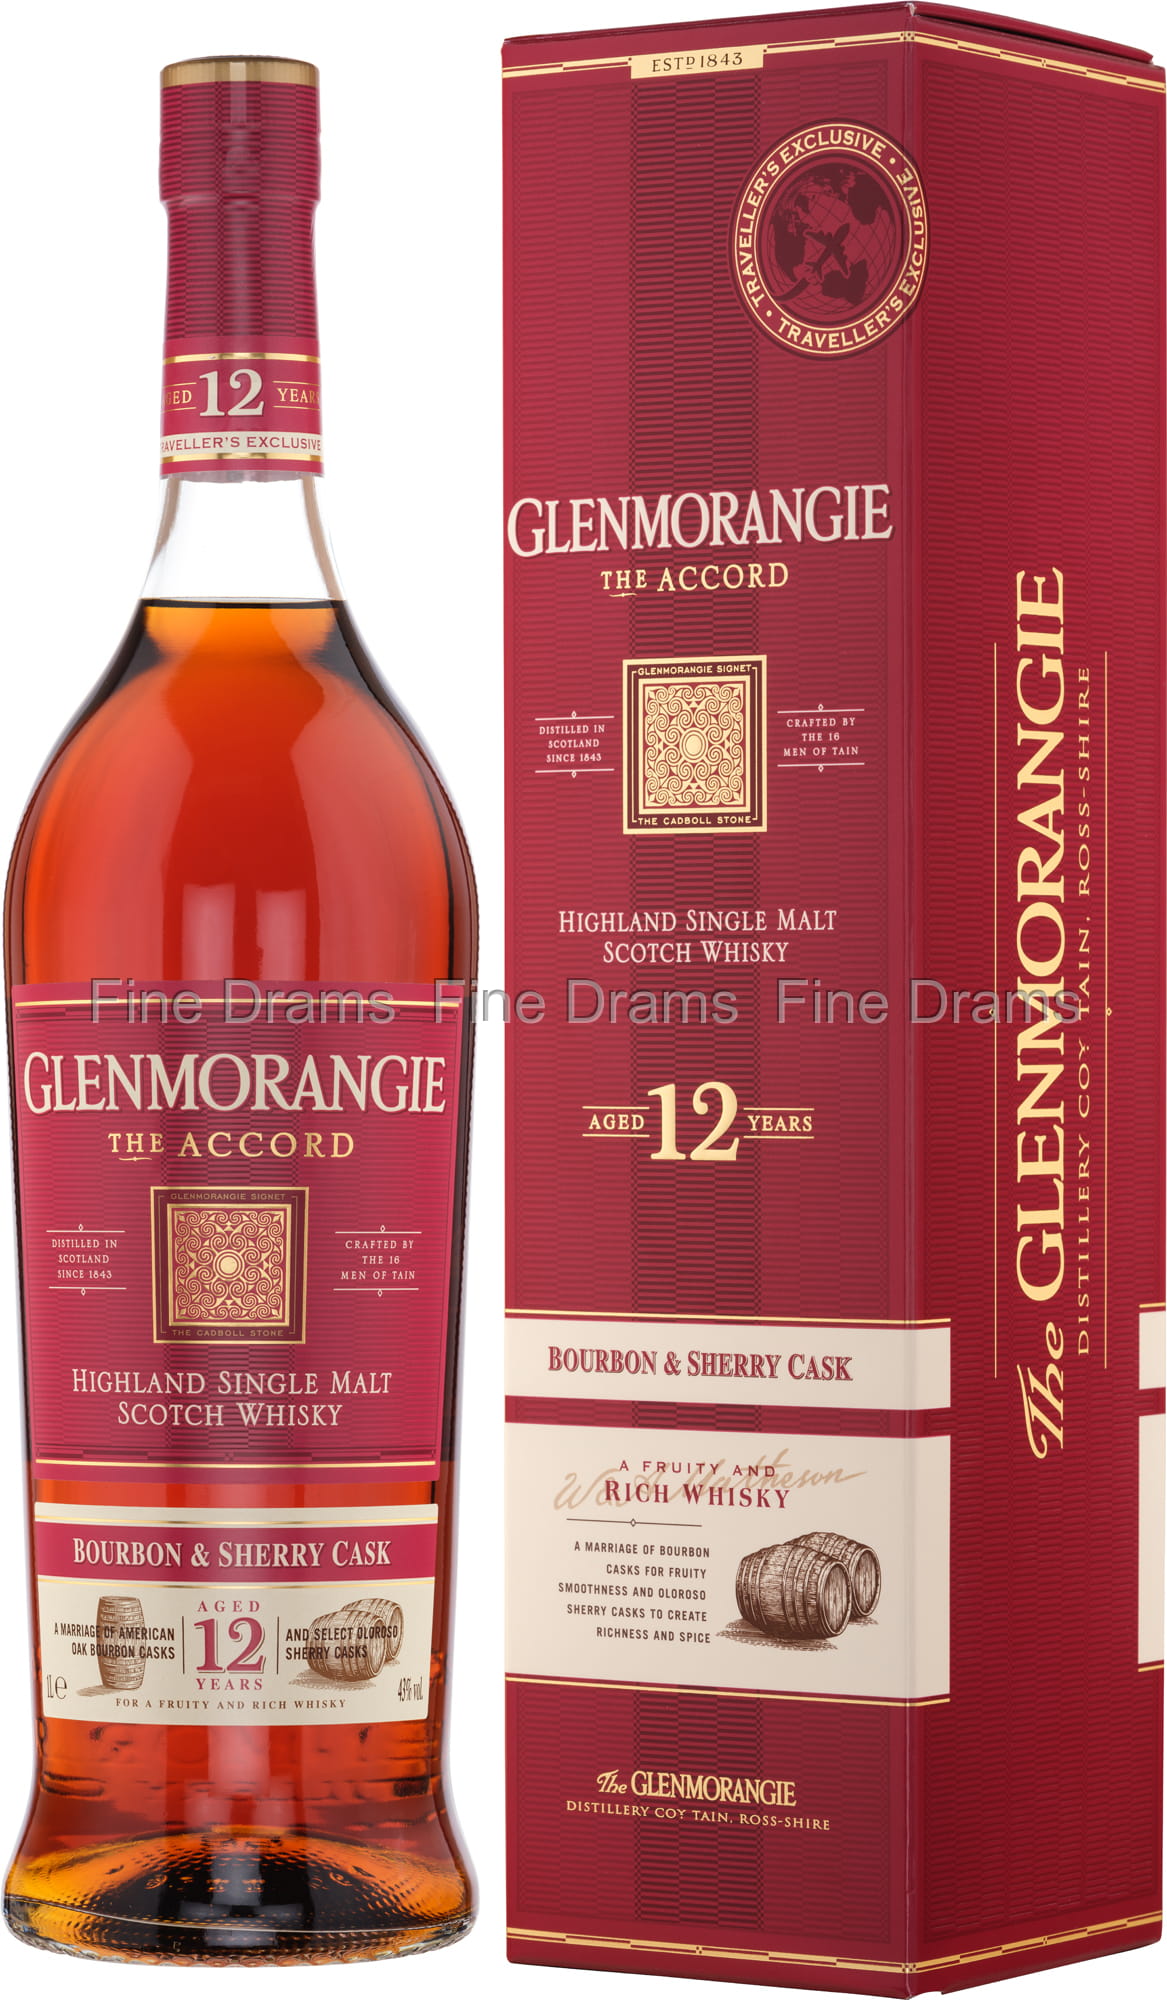 https://images.finedrams.com/image/54818-large-1605733290/glenmorangie-the-accord-12-year-old-whisky-1-liter.jpg